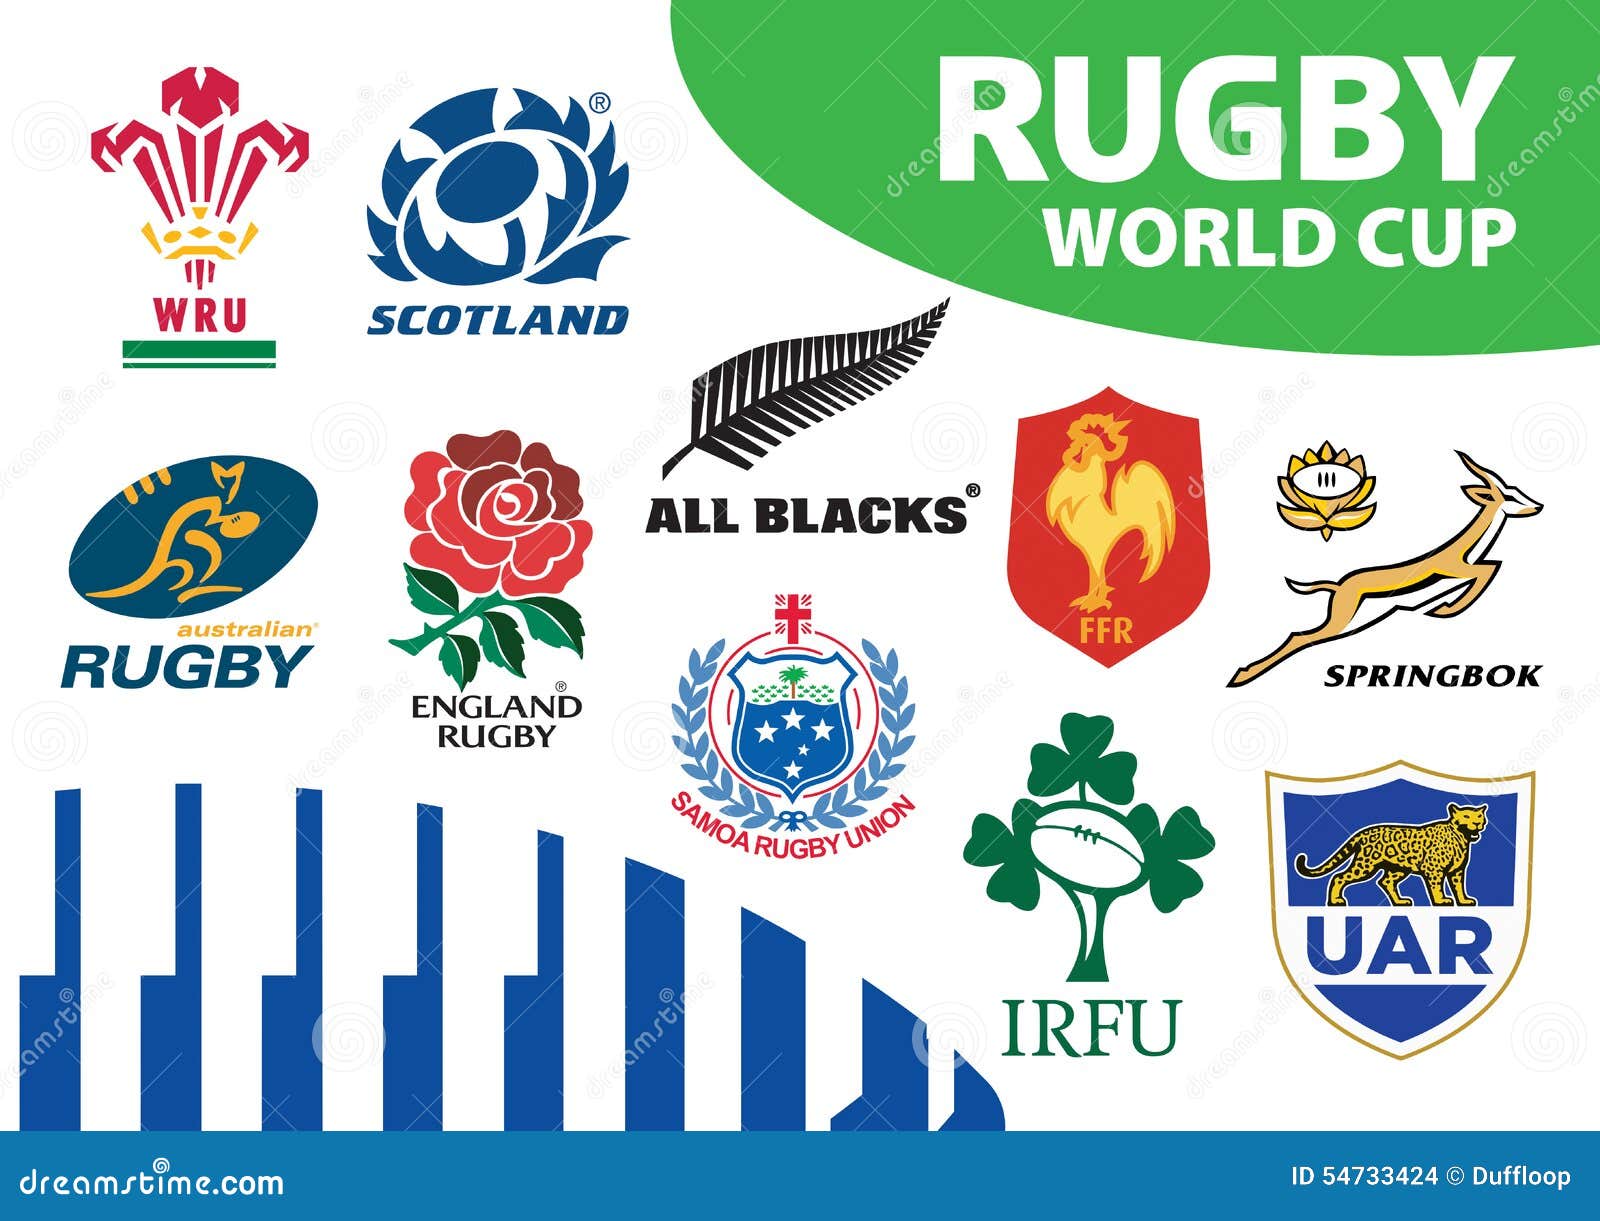 World ranking rugby Planet Rugby's